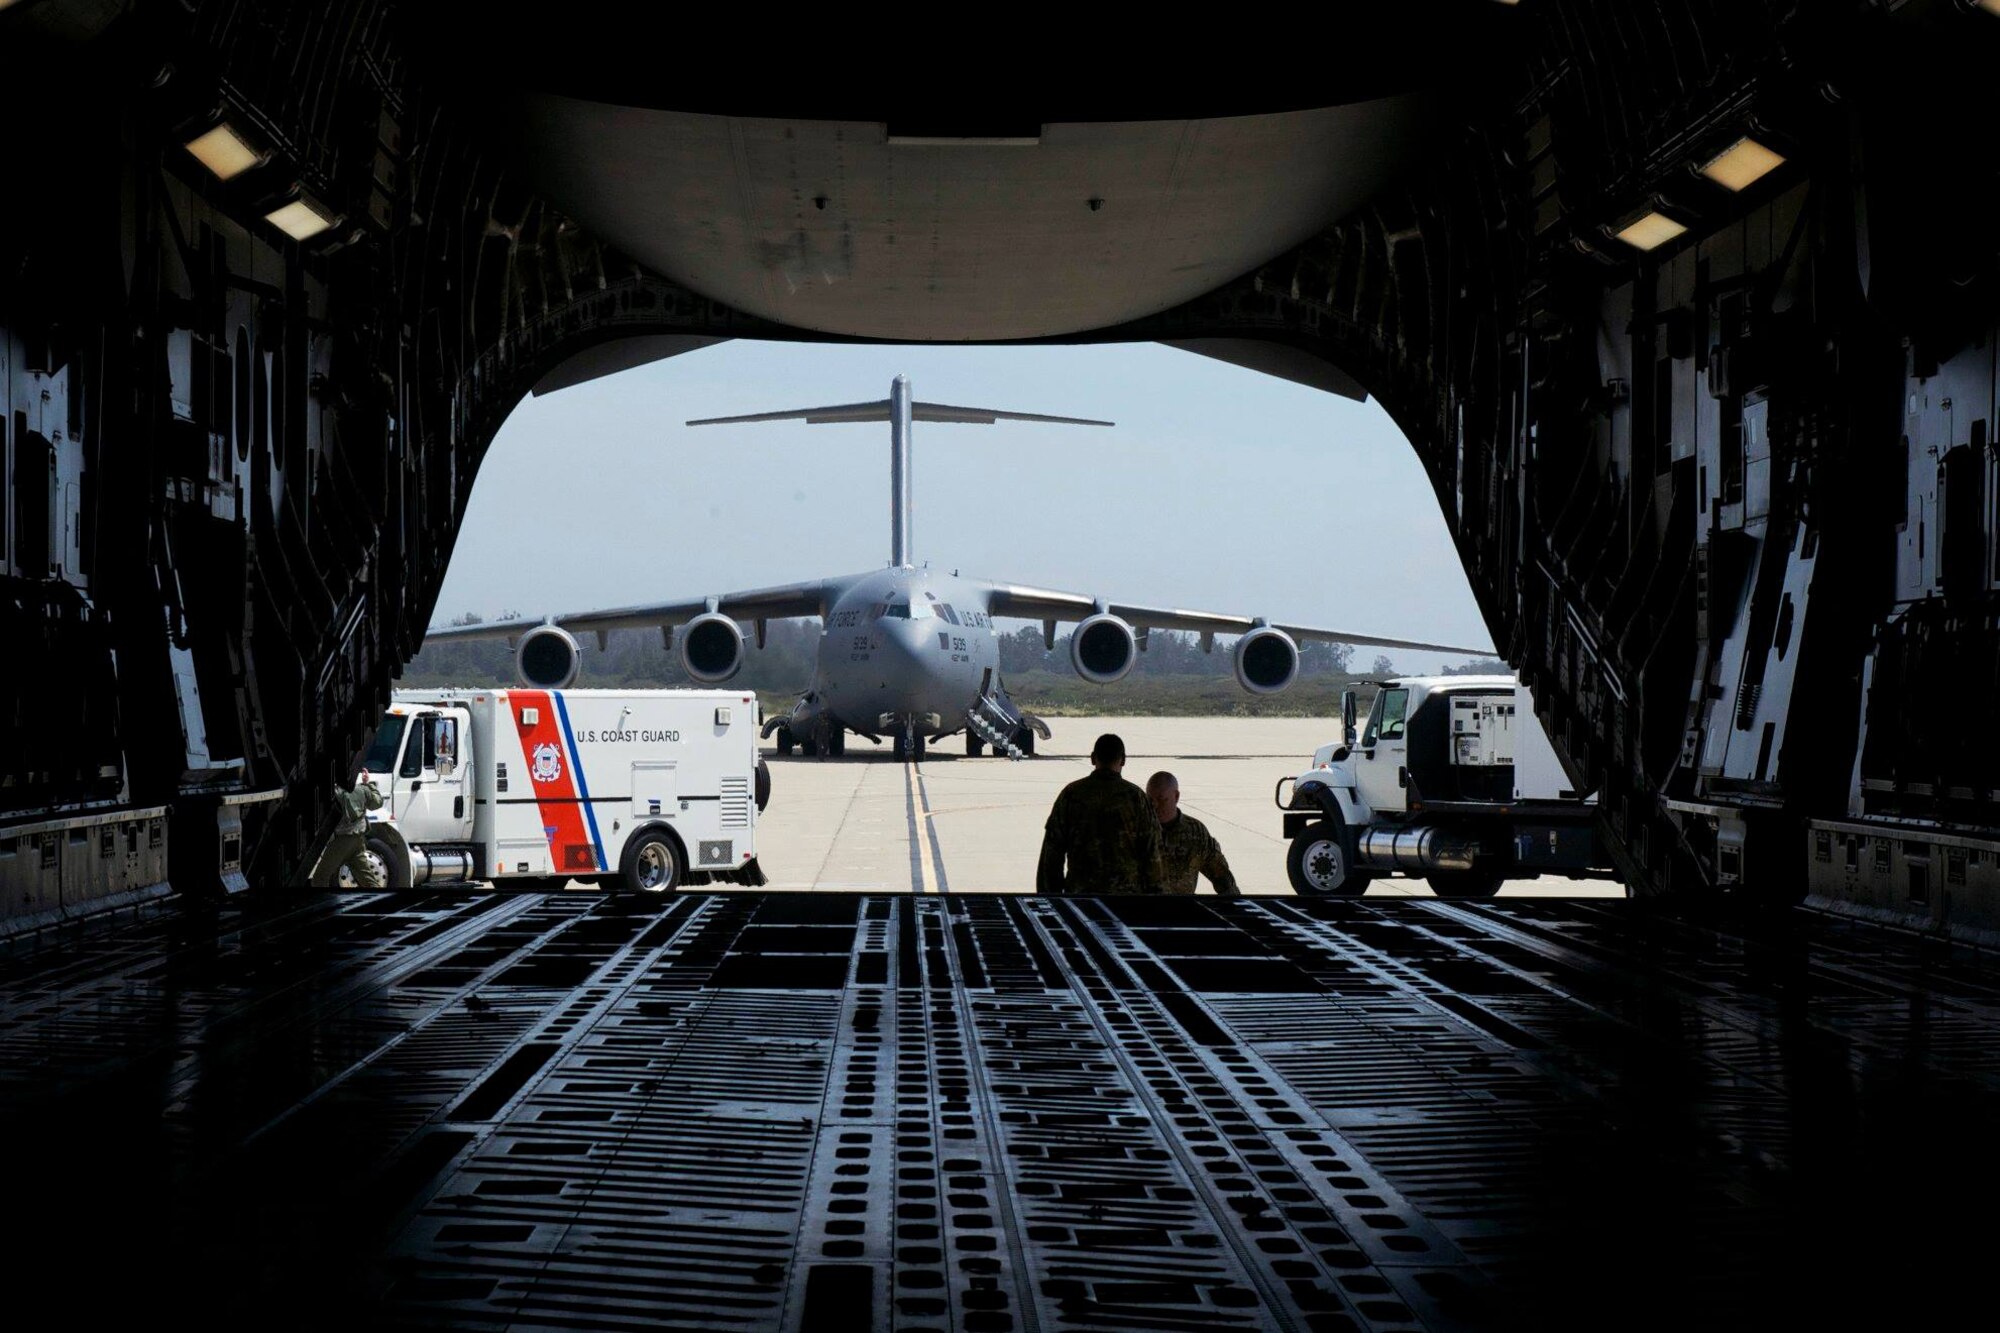 An Air Force C-17 and Coast Guard vehicle can be seen through the cargo bay of another Air Force C-17.